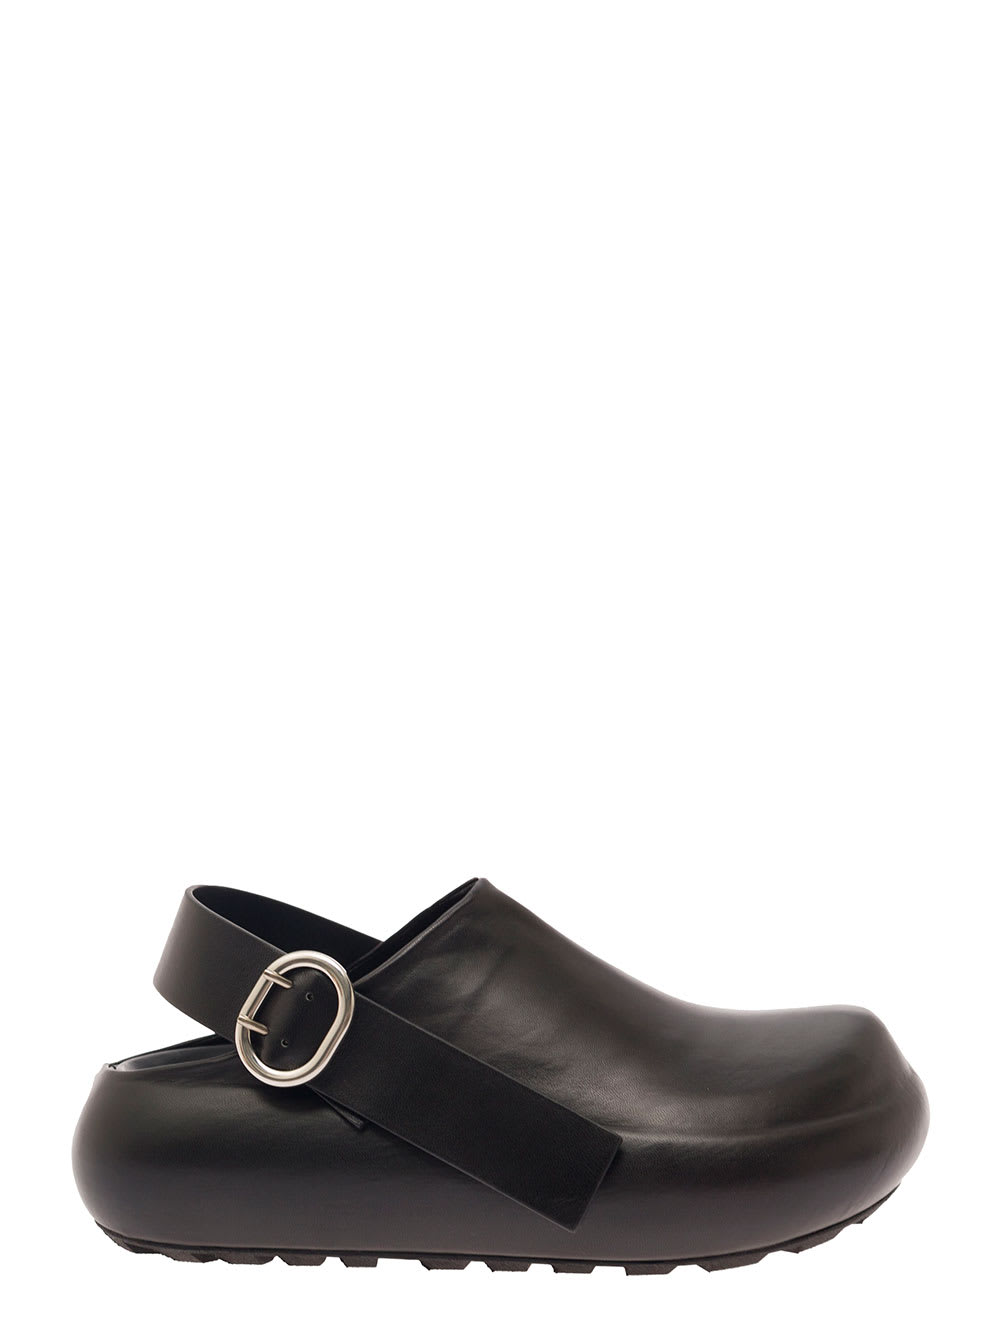 Jil Sander Black Clogs With Ankle Strap In Leather Woman